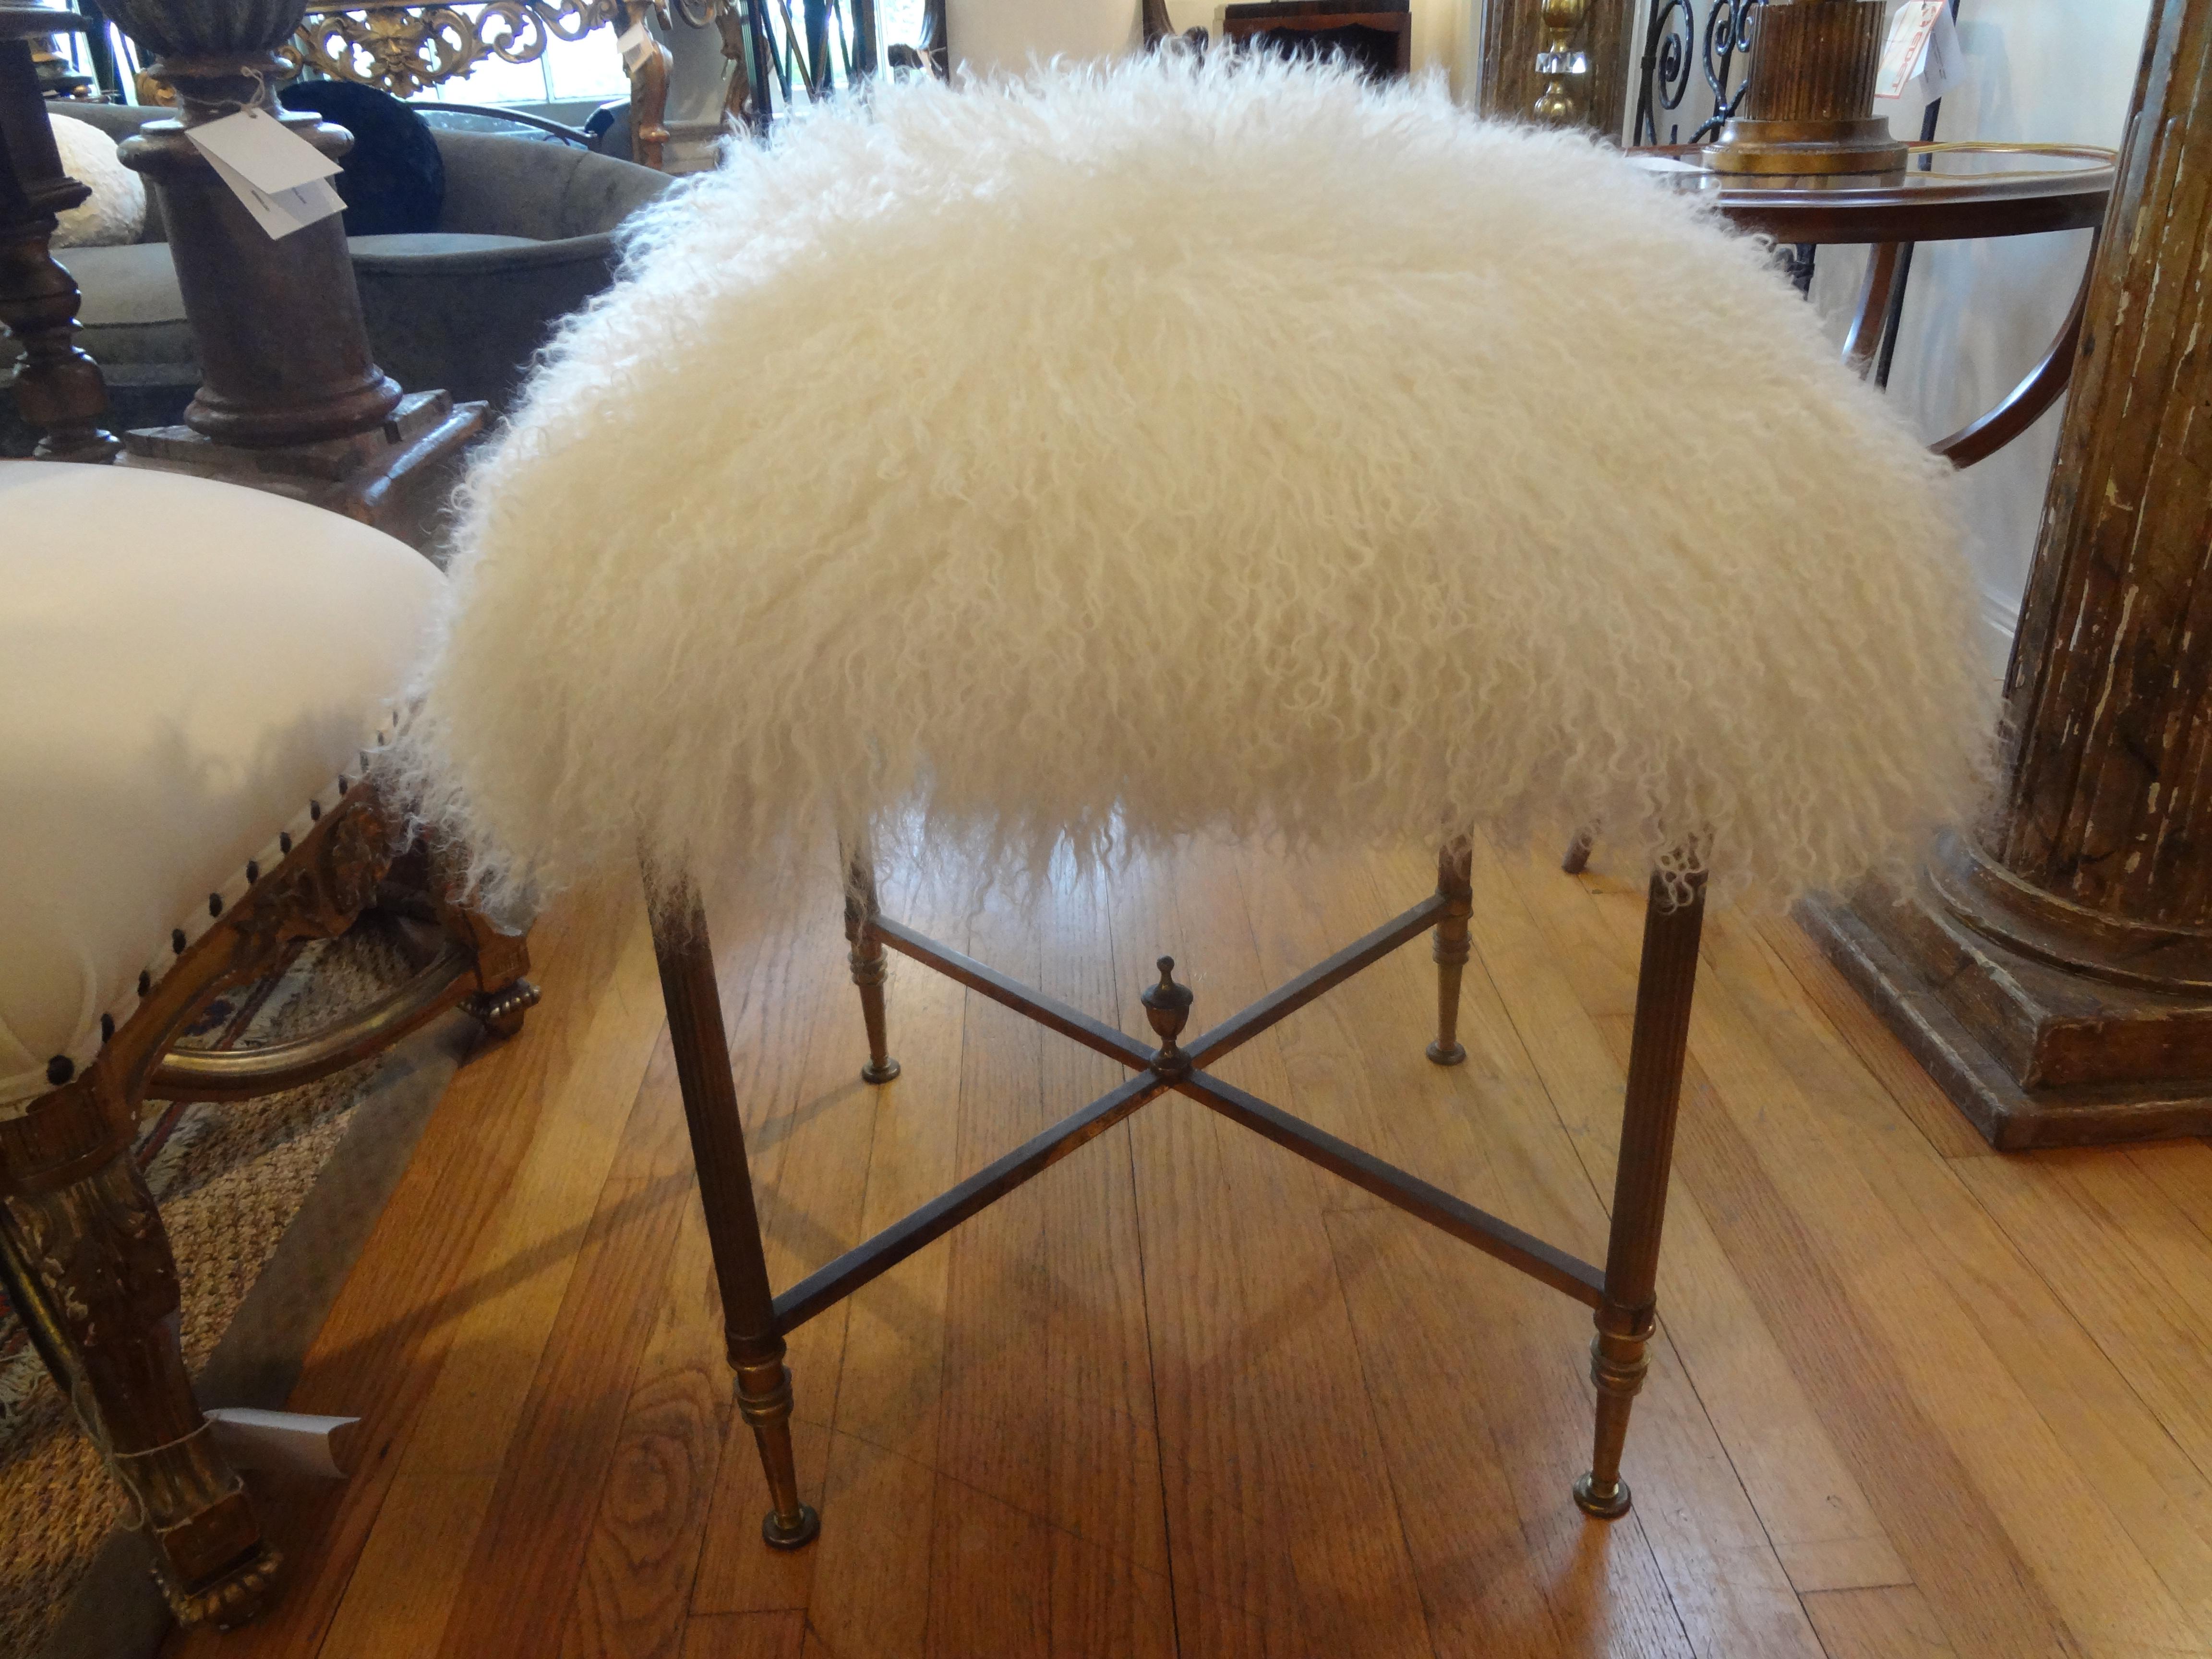 Beautiful, large and comfortable French Maison Jansen inspired brass bench, ottoman or stool newly upholstered in white curly Mongolian lambs wool. A versatile and usable ottoman for extra seating wherever needed. This Hollywood Regency brass bench